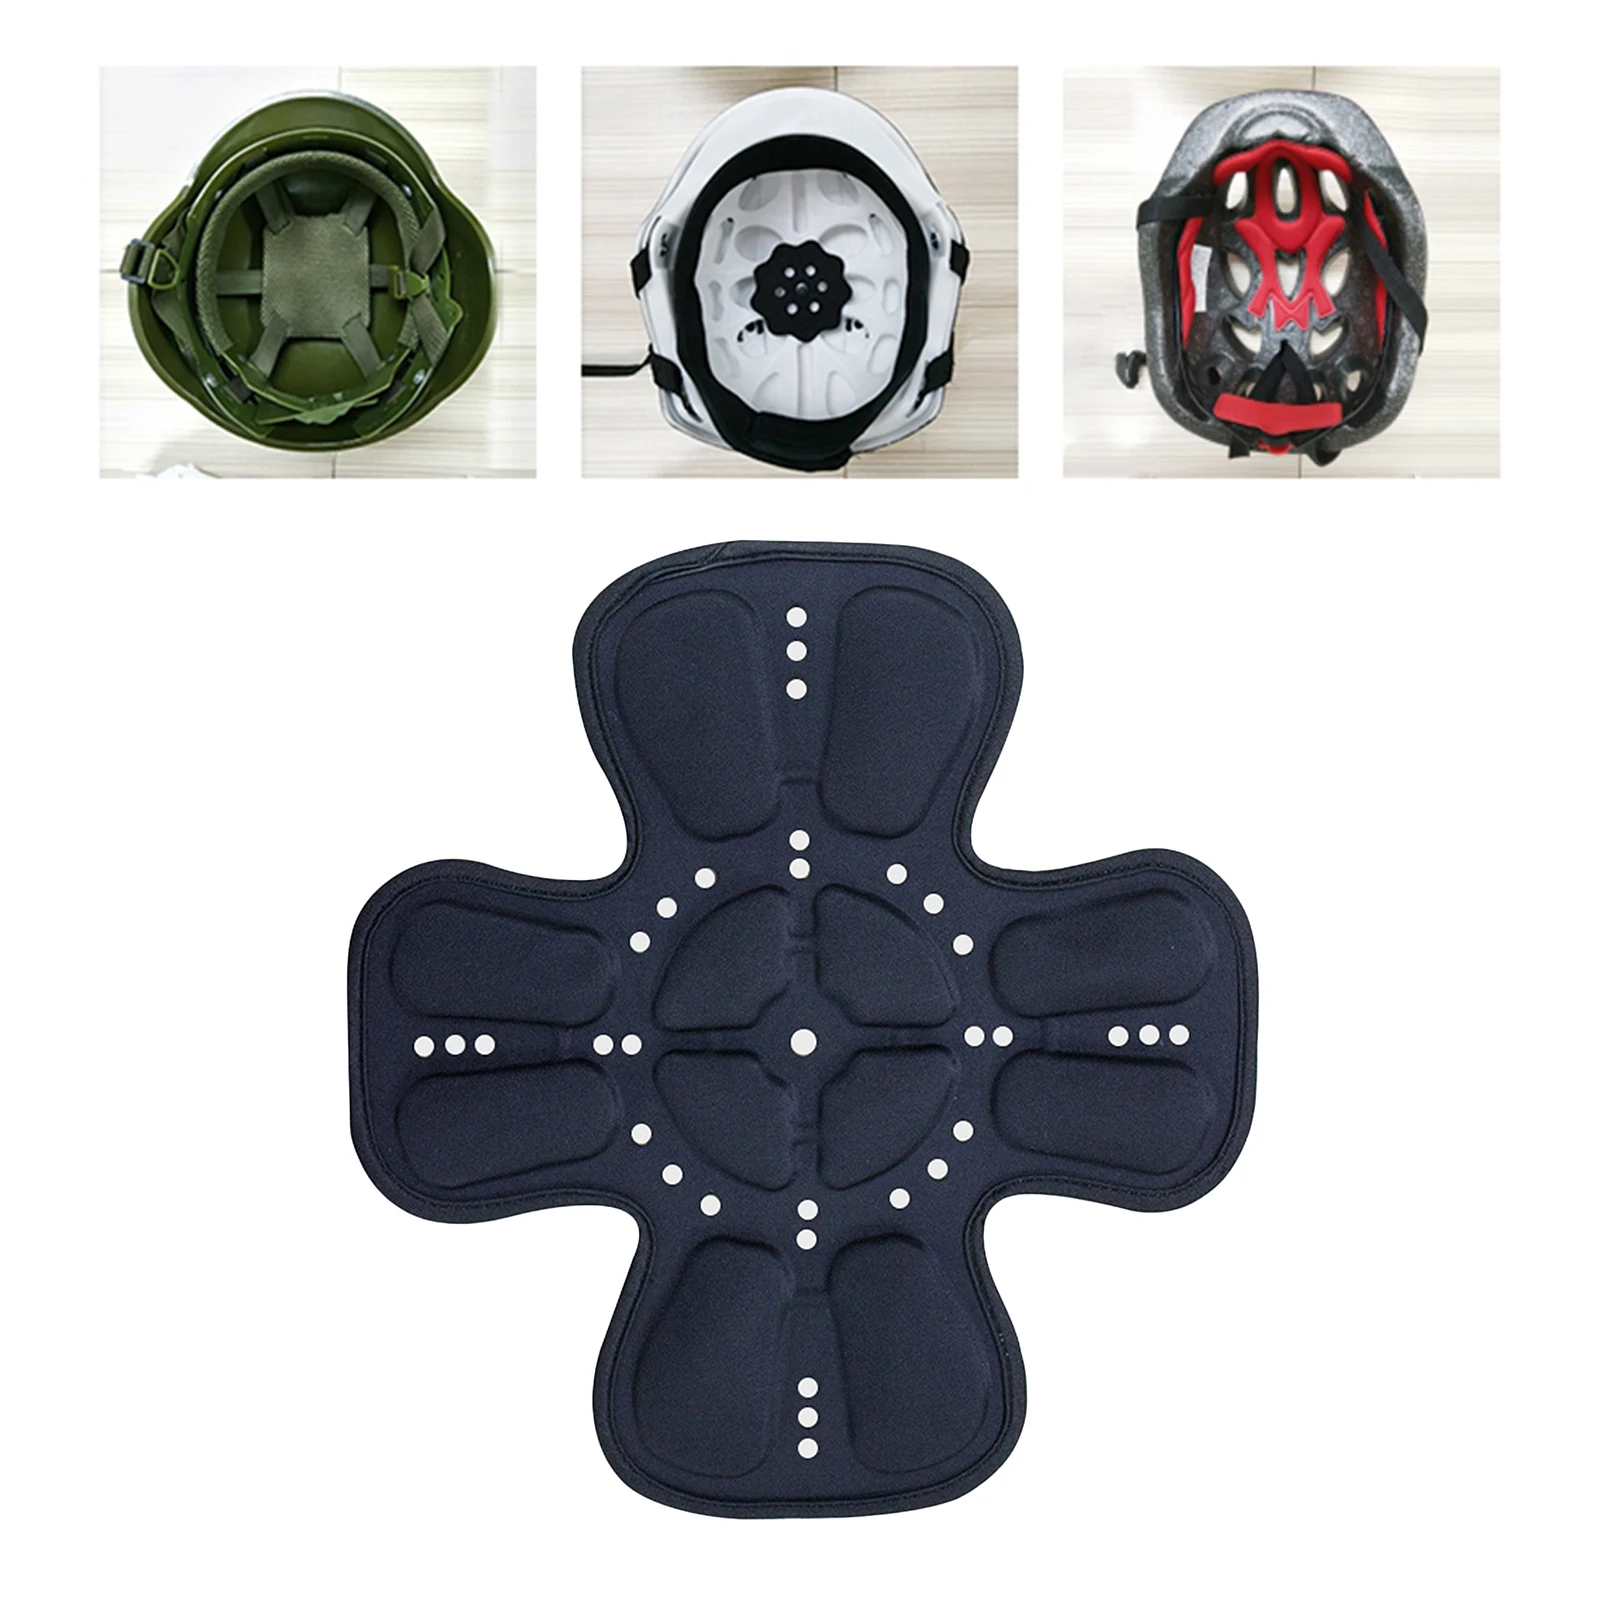 Breathable Motorcycle Helmet Liner Pad Cushion Padding Protection Insert 4D Shock Absorber for Motorcycle Racing Riding